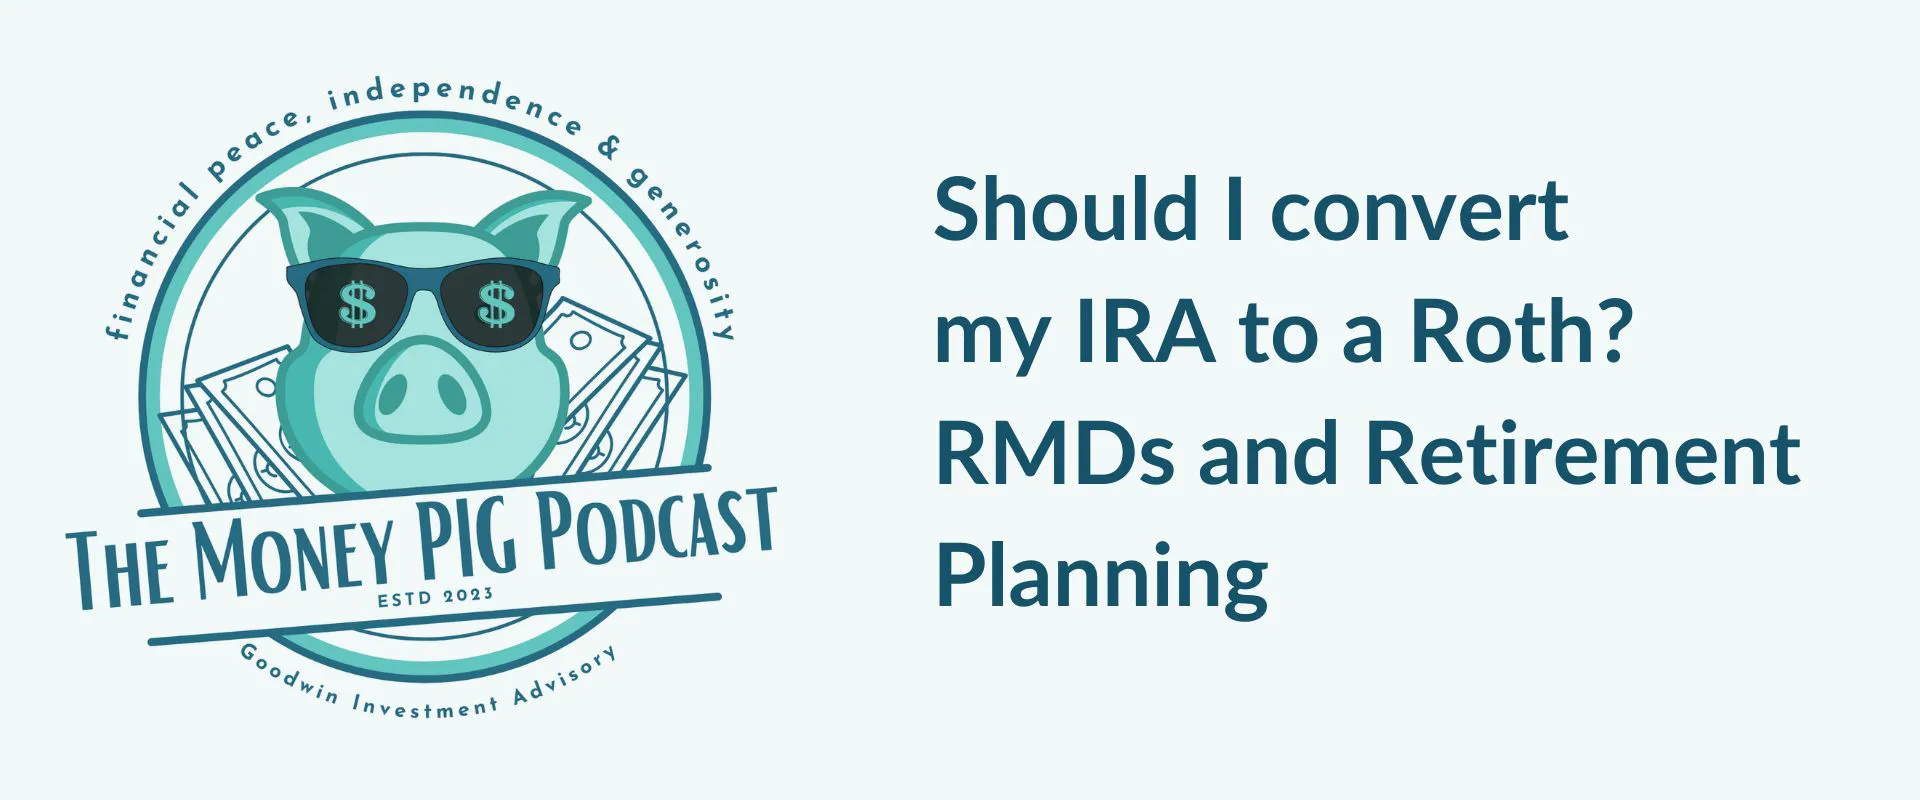 Should I convert my IRA to a Roth RMDs and Retirement Planning